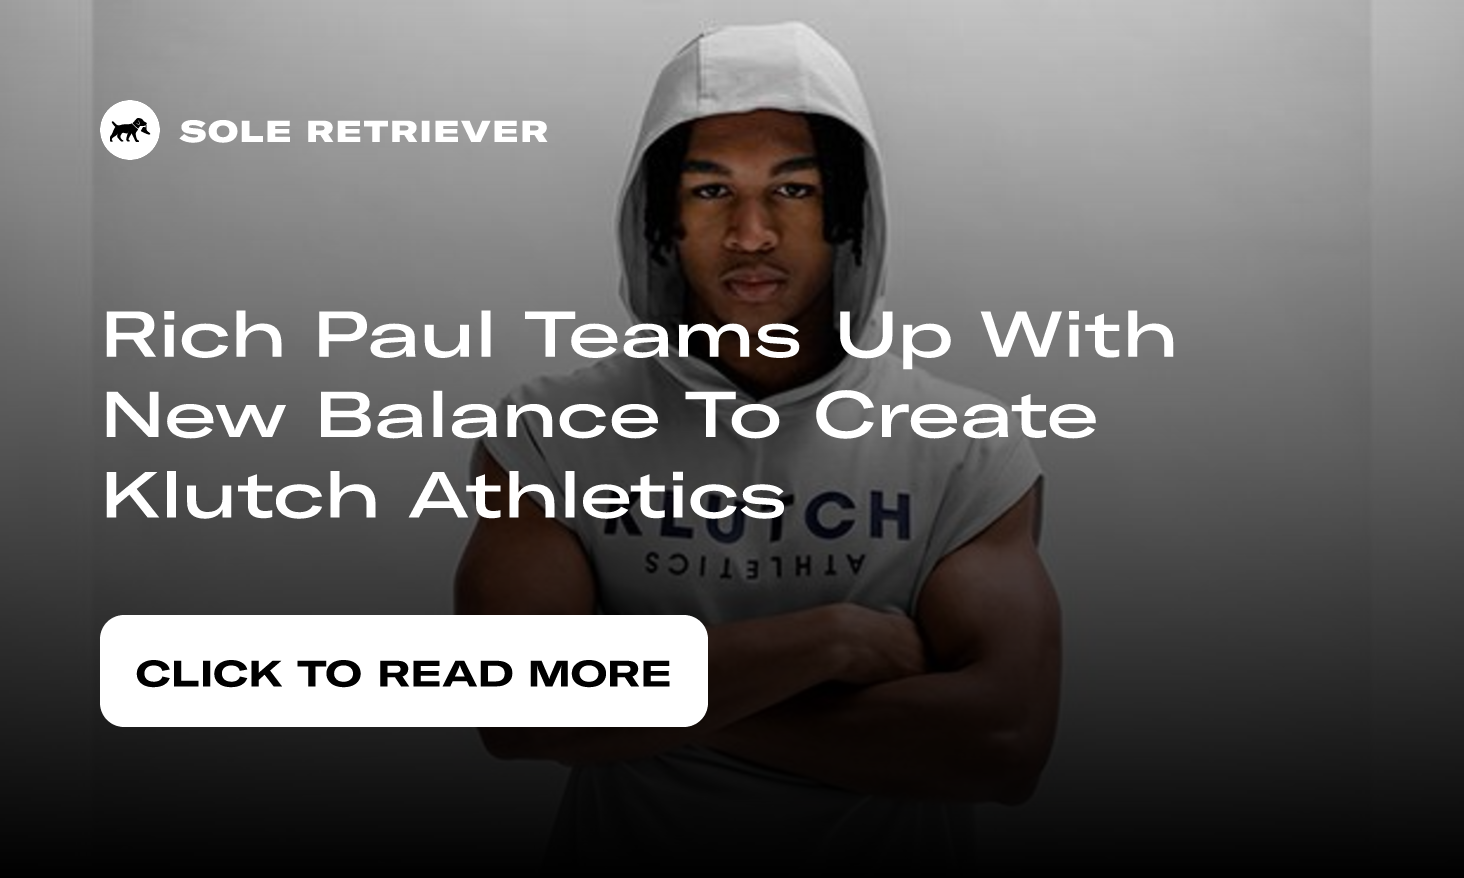 Rich Paul Teams Up With New Balance To Create Klutch Athletics